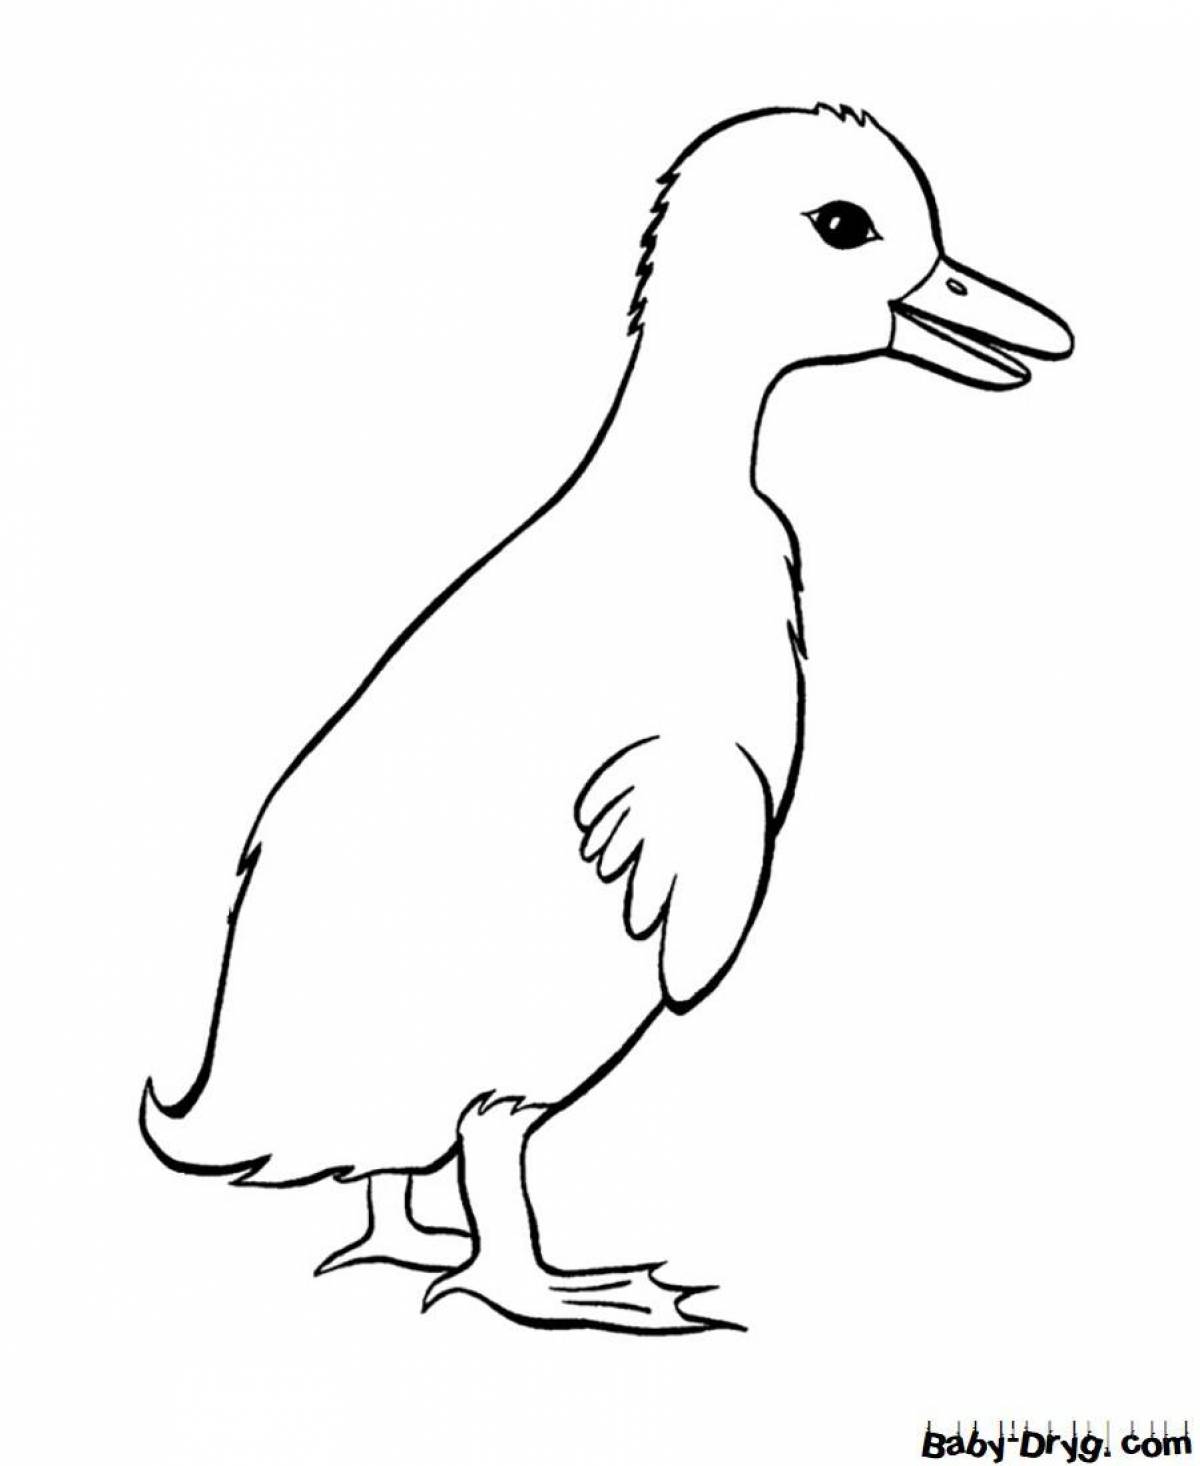 Lalafanfan duck coloring page